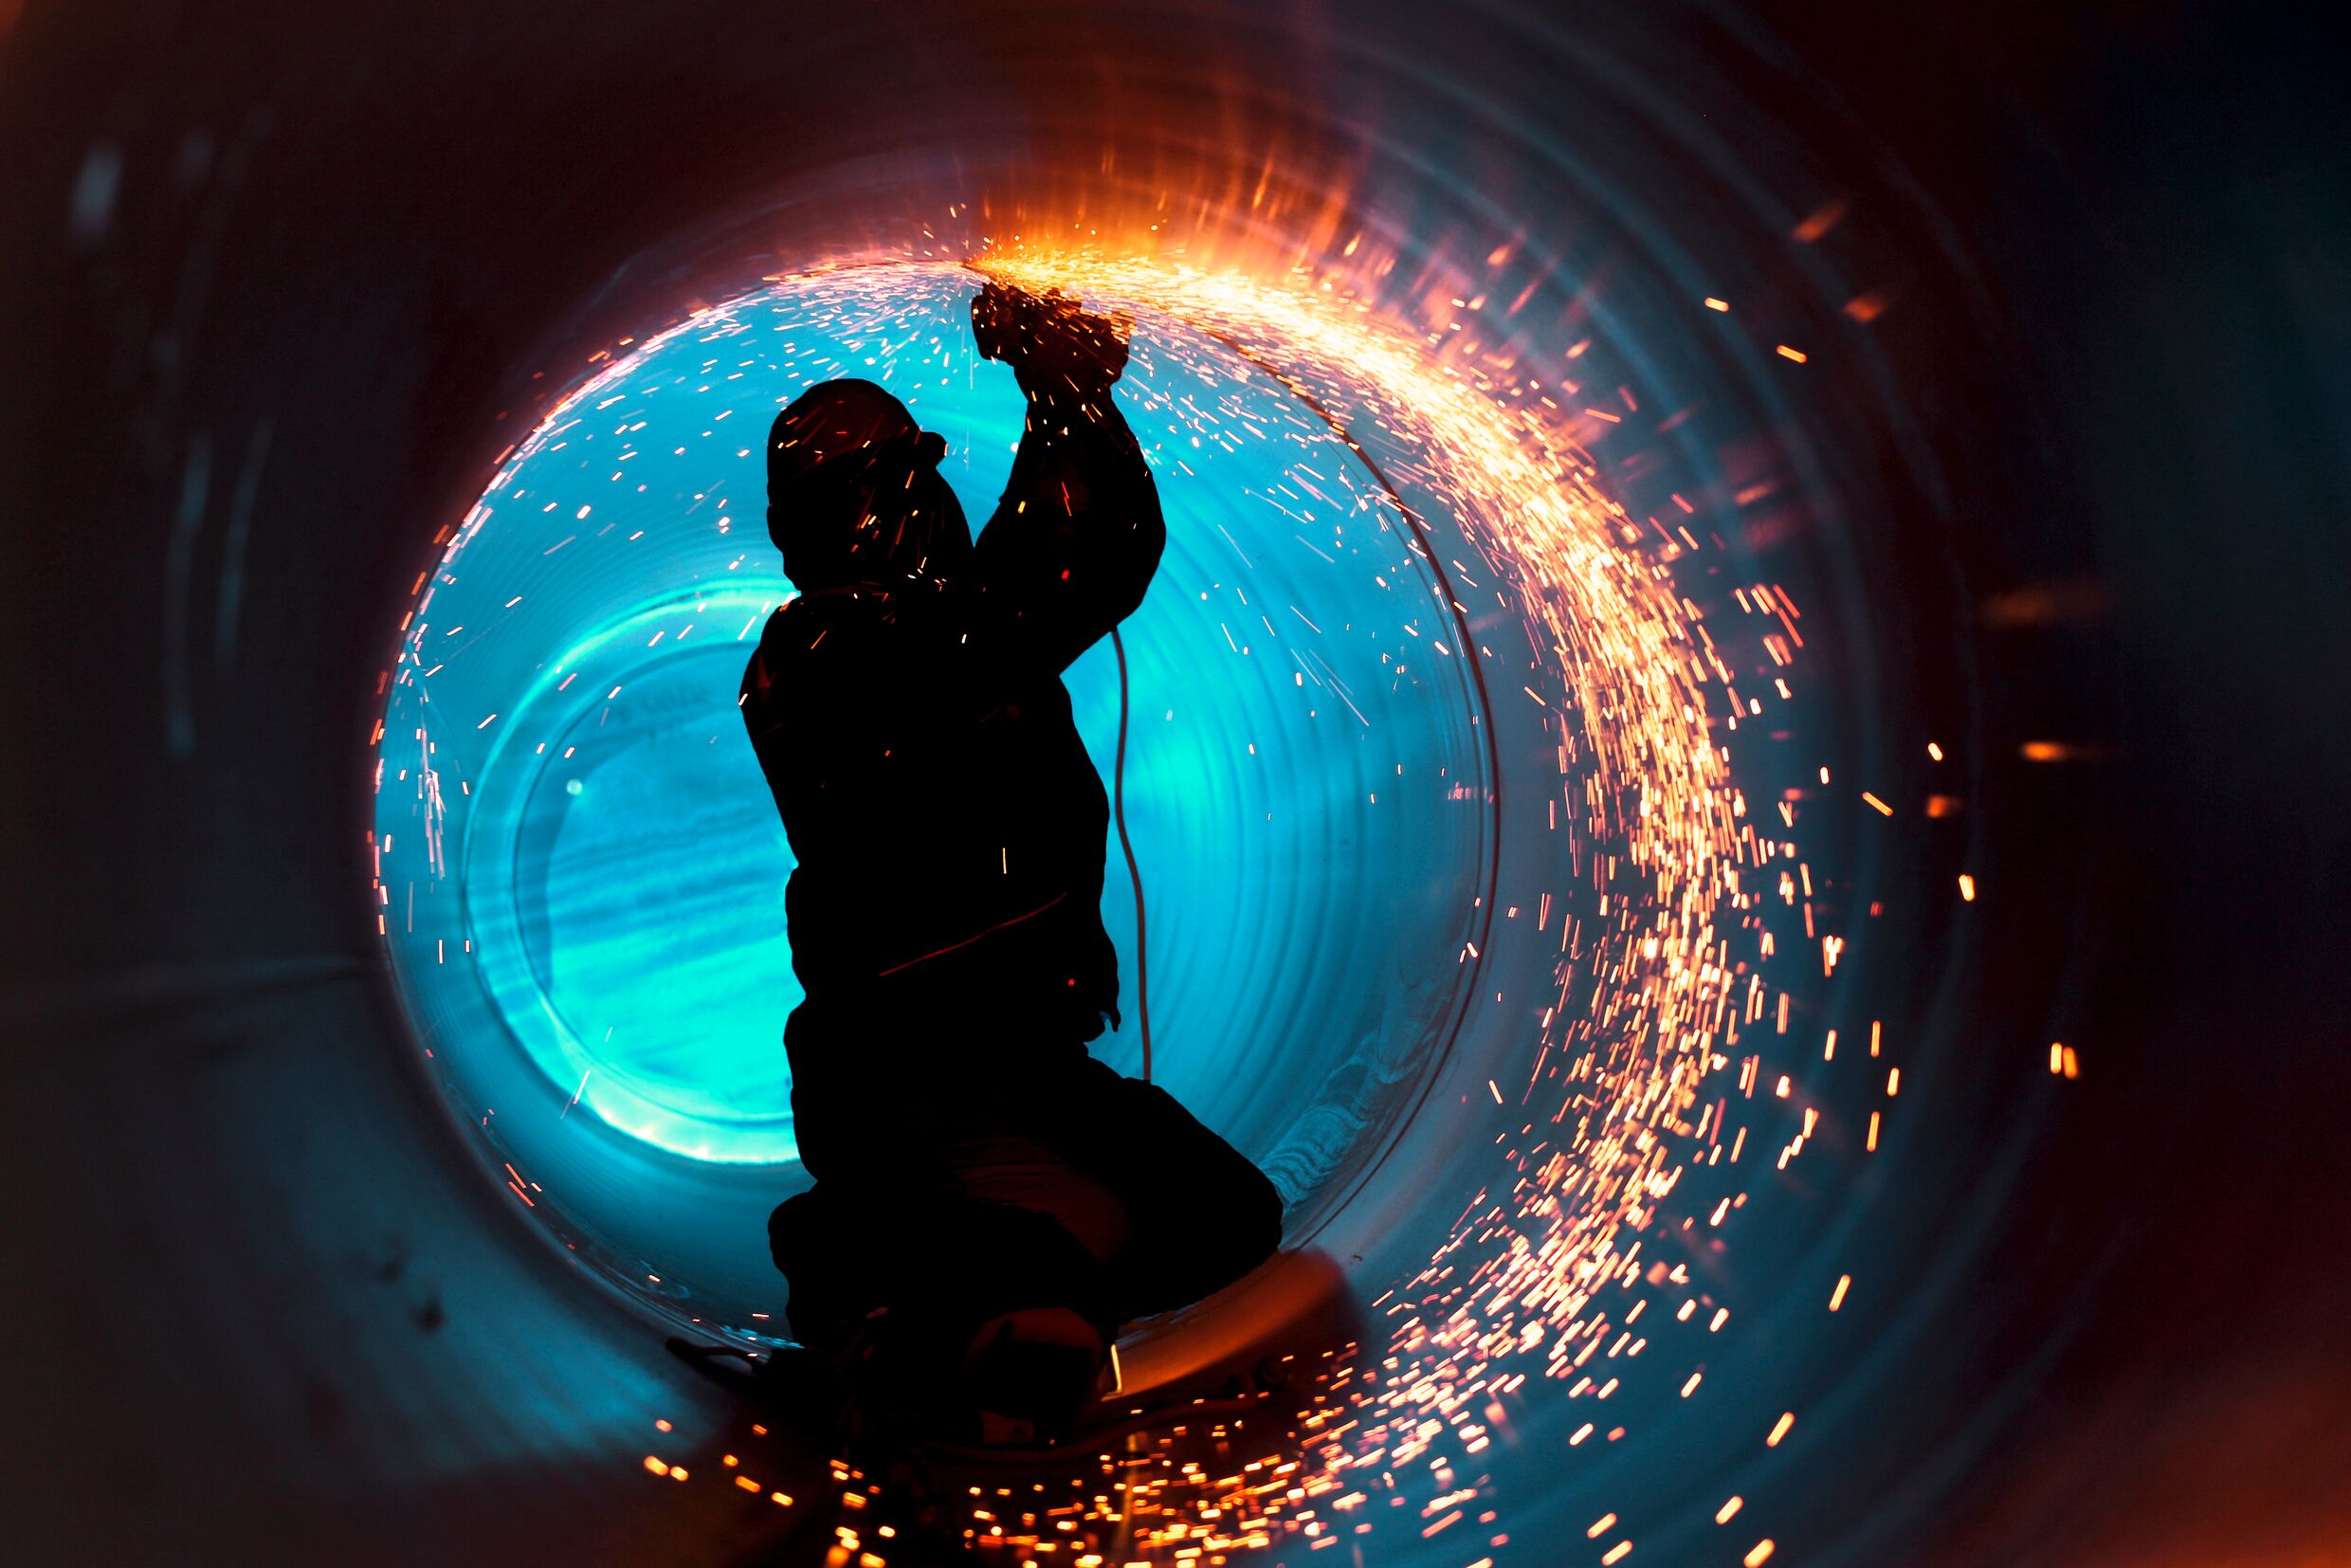 Medium A5 RGB web-A worker works inside a pipe on a pipeline construction.jpg